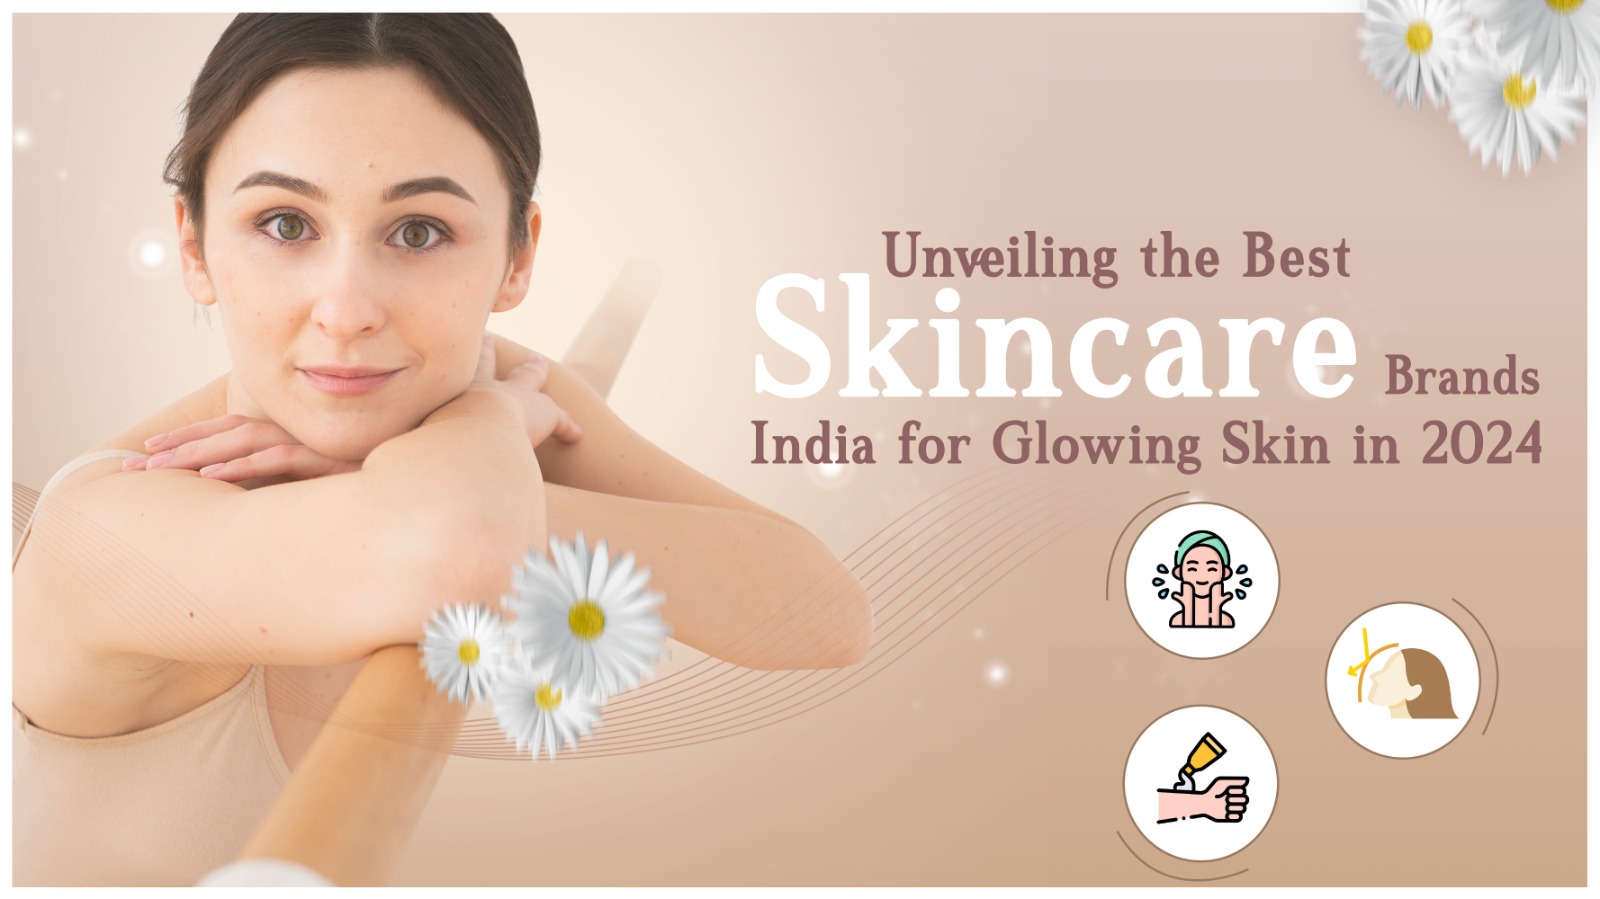  Unveiling the Best Skincare Brands in India for Glowing Skin in 2024